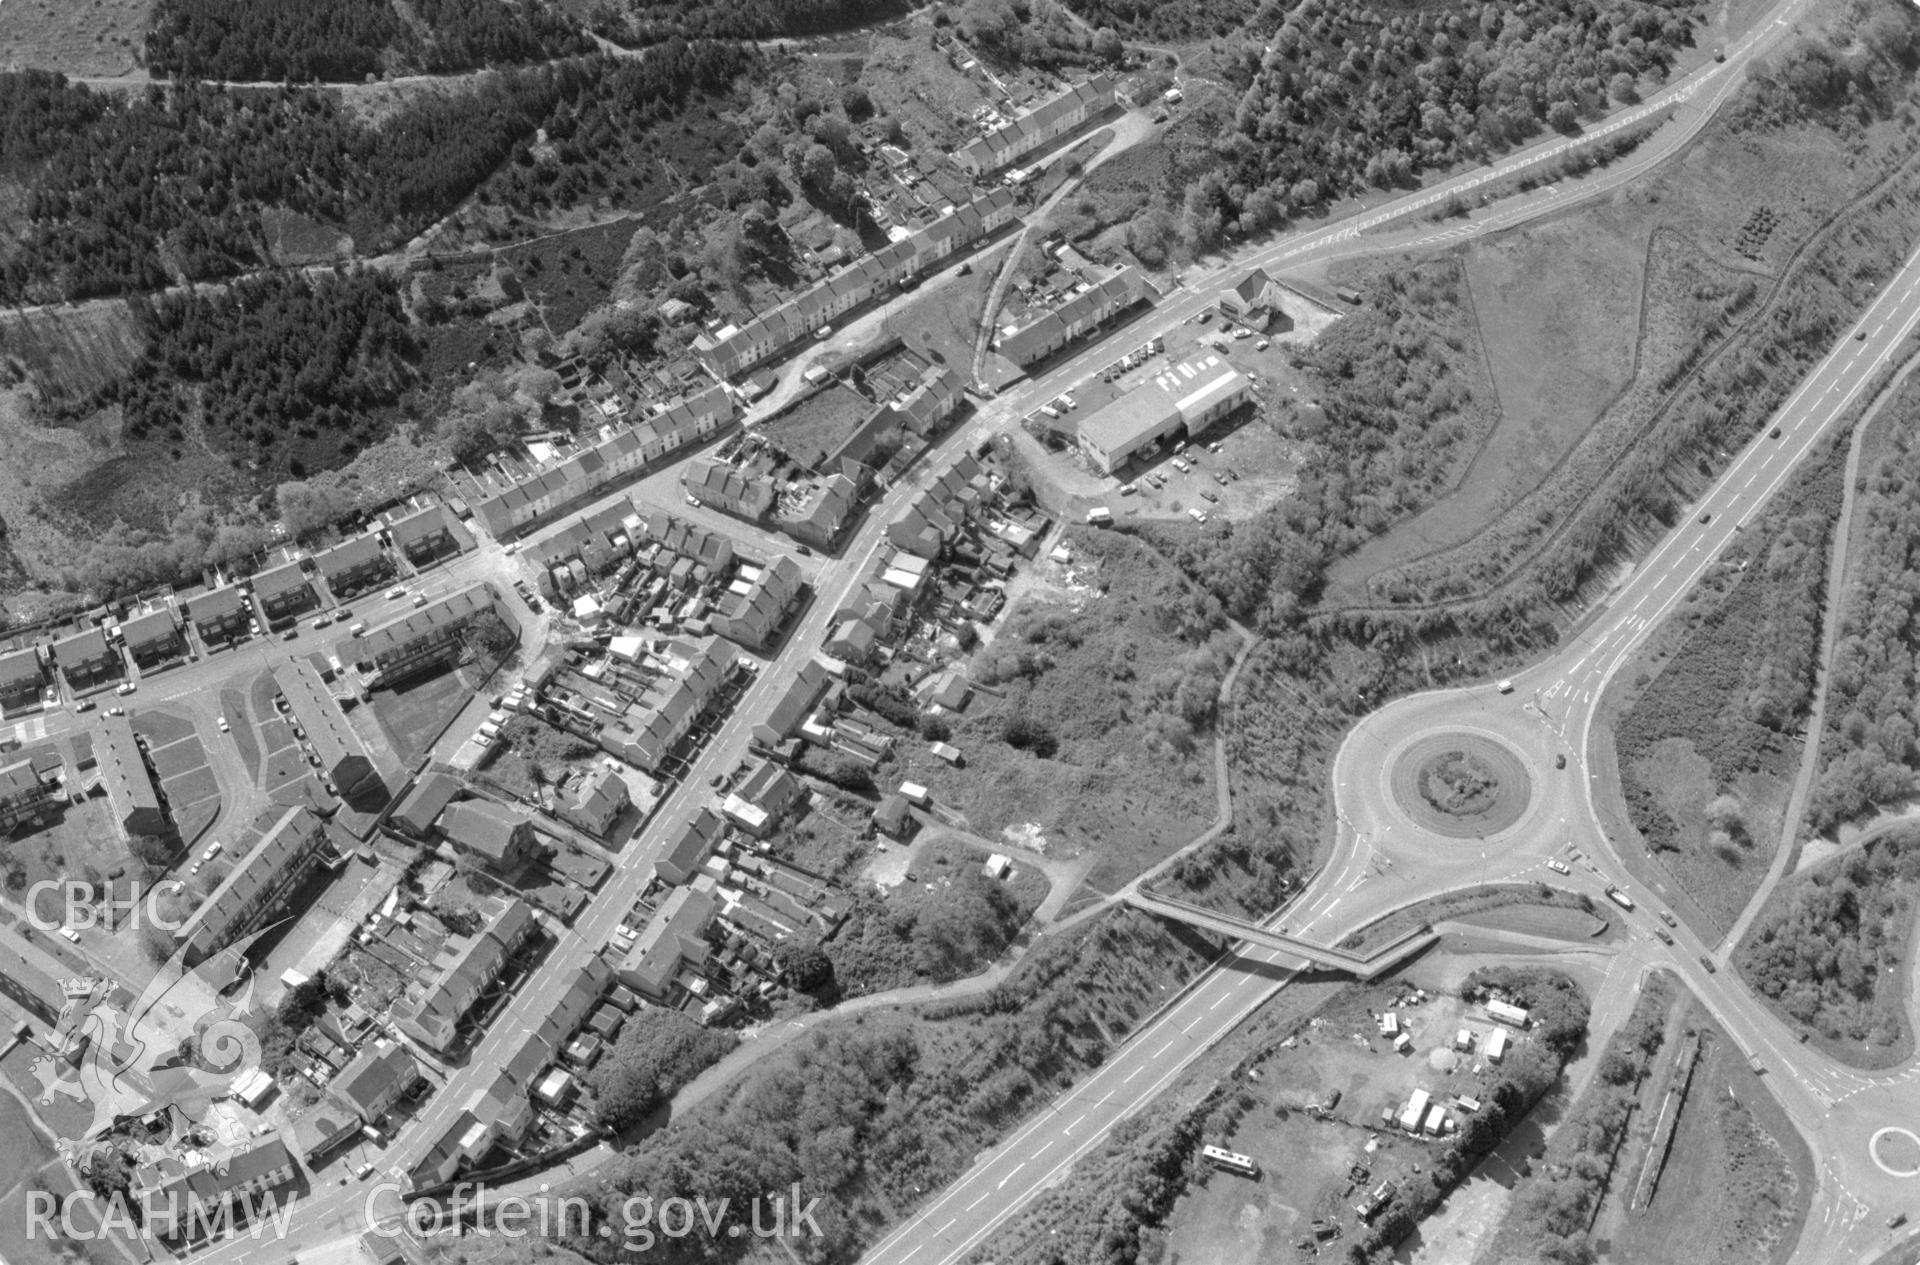 RCAHMW Black and white oblique aerial photograph of Hafod Copperworks  by Toby Driver, 1998.